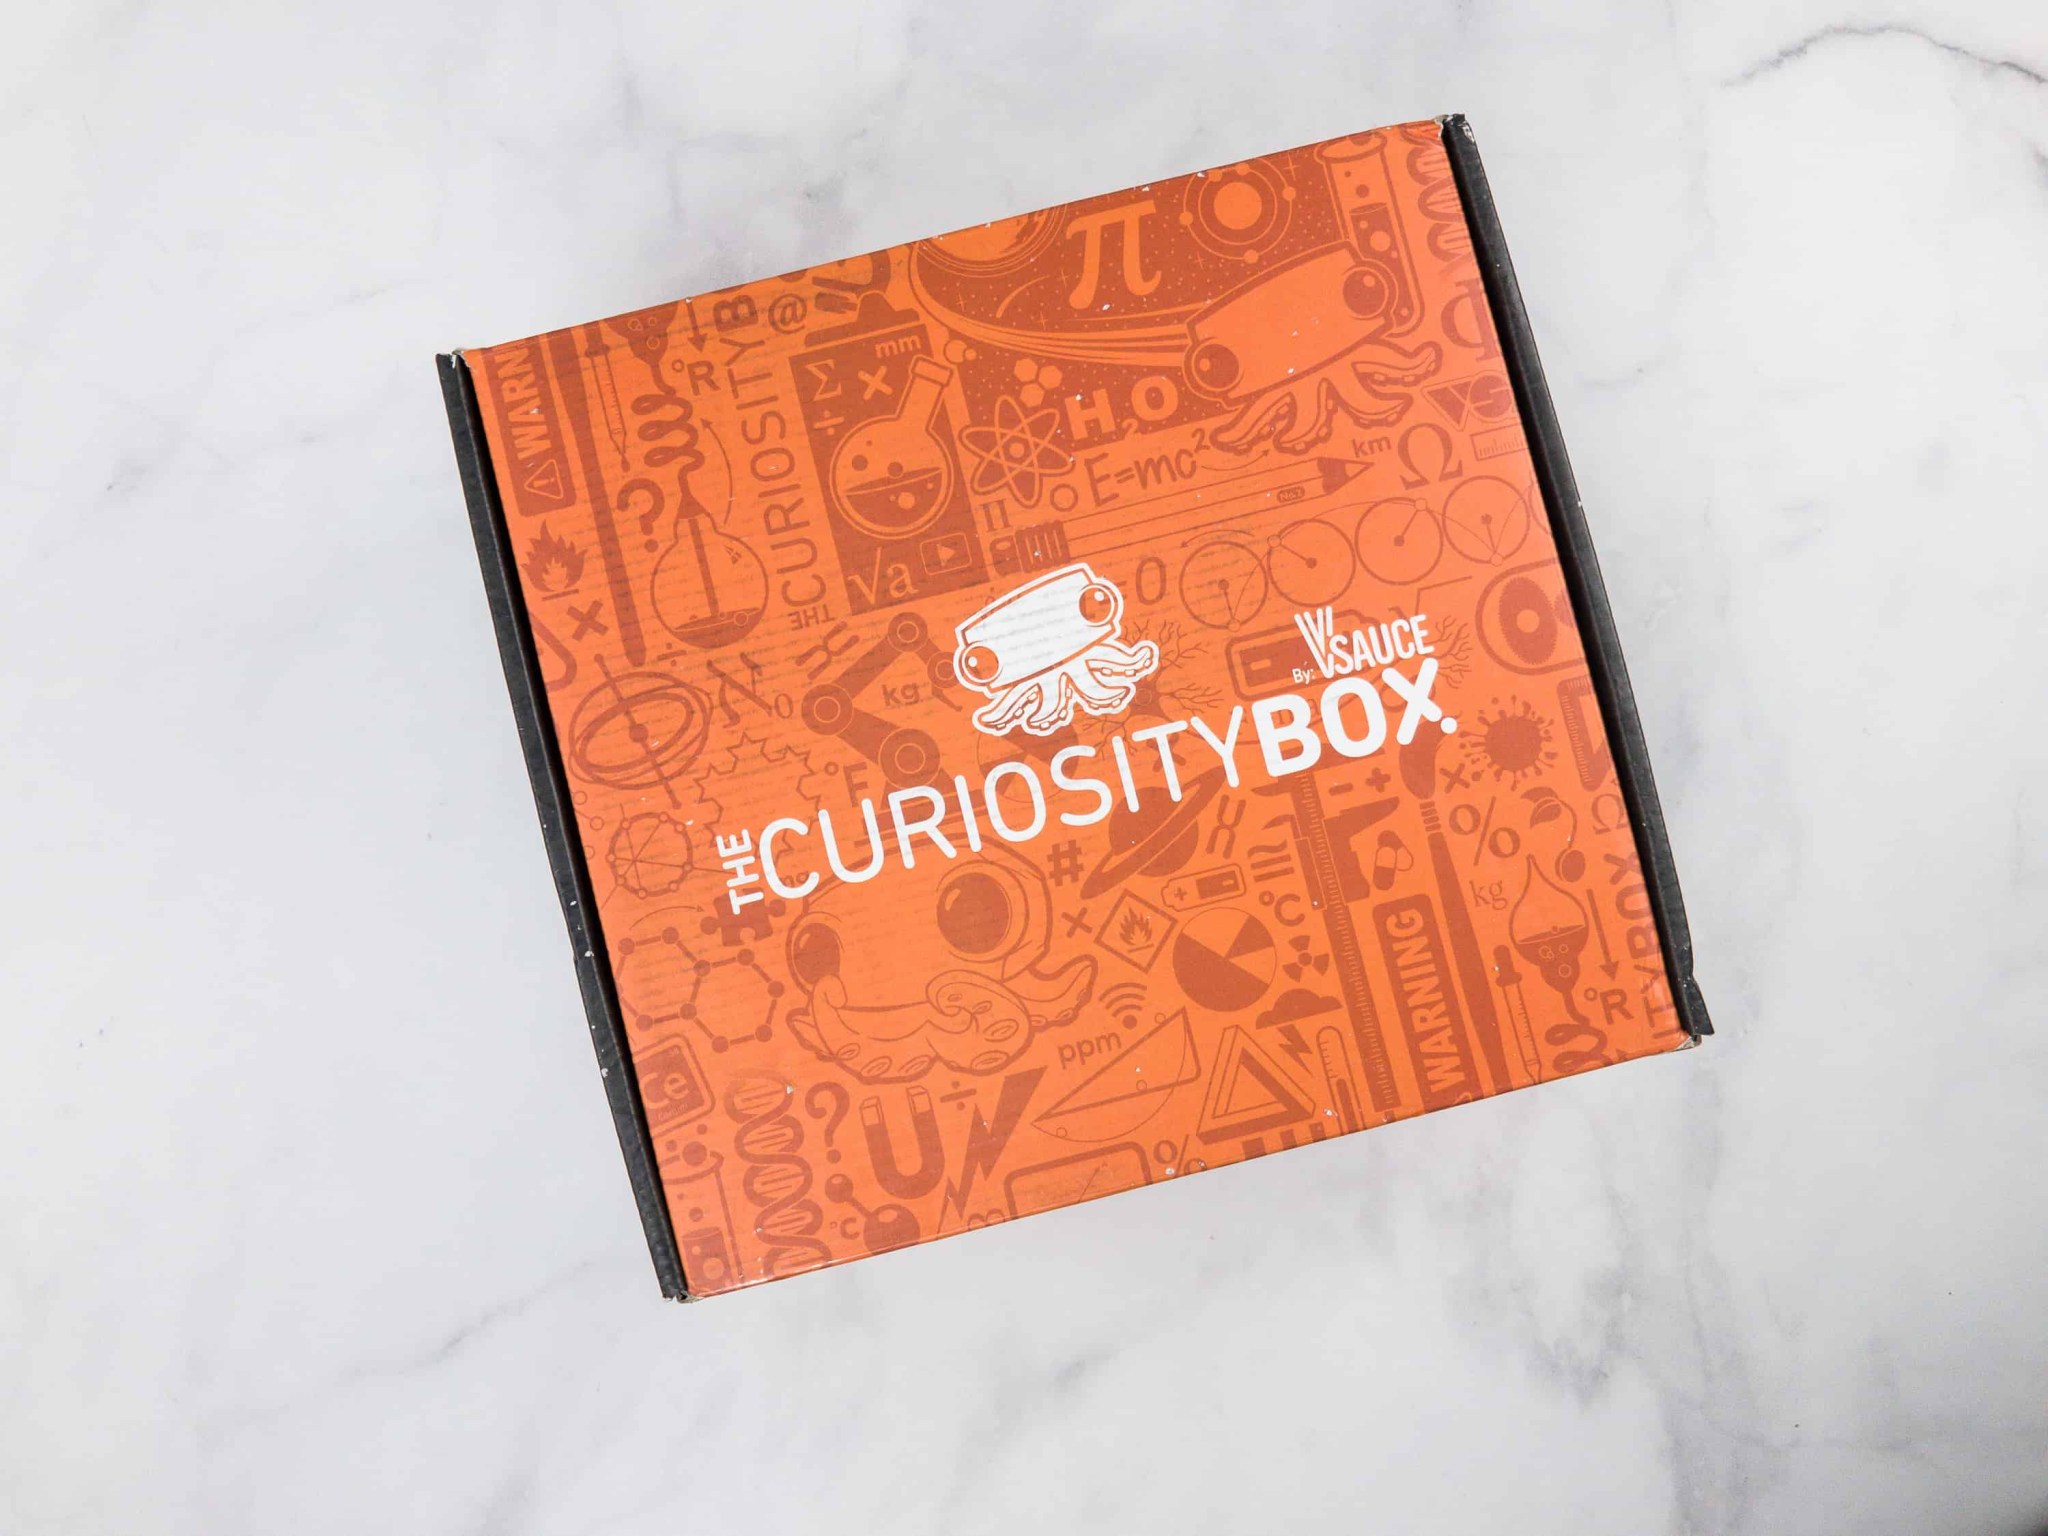 The Curiosity Box by VSauce Subscription Box Review - Winter 2018 ...